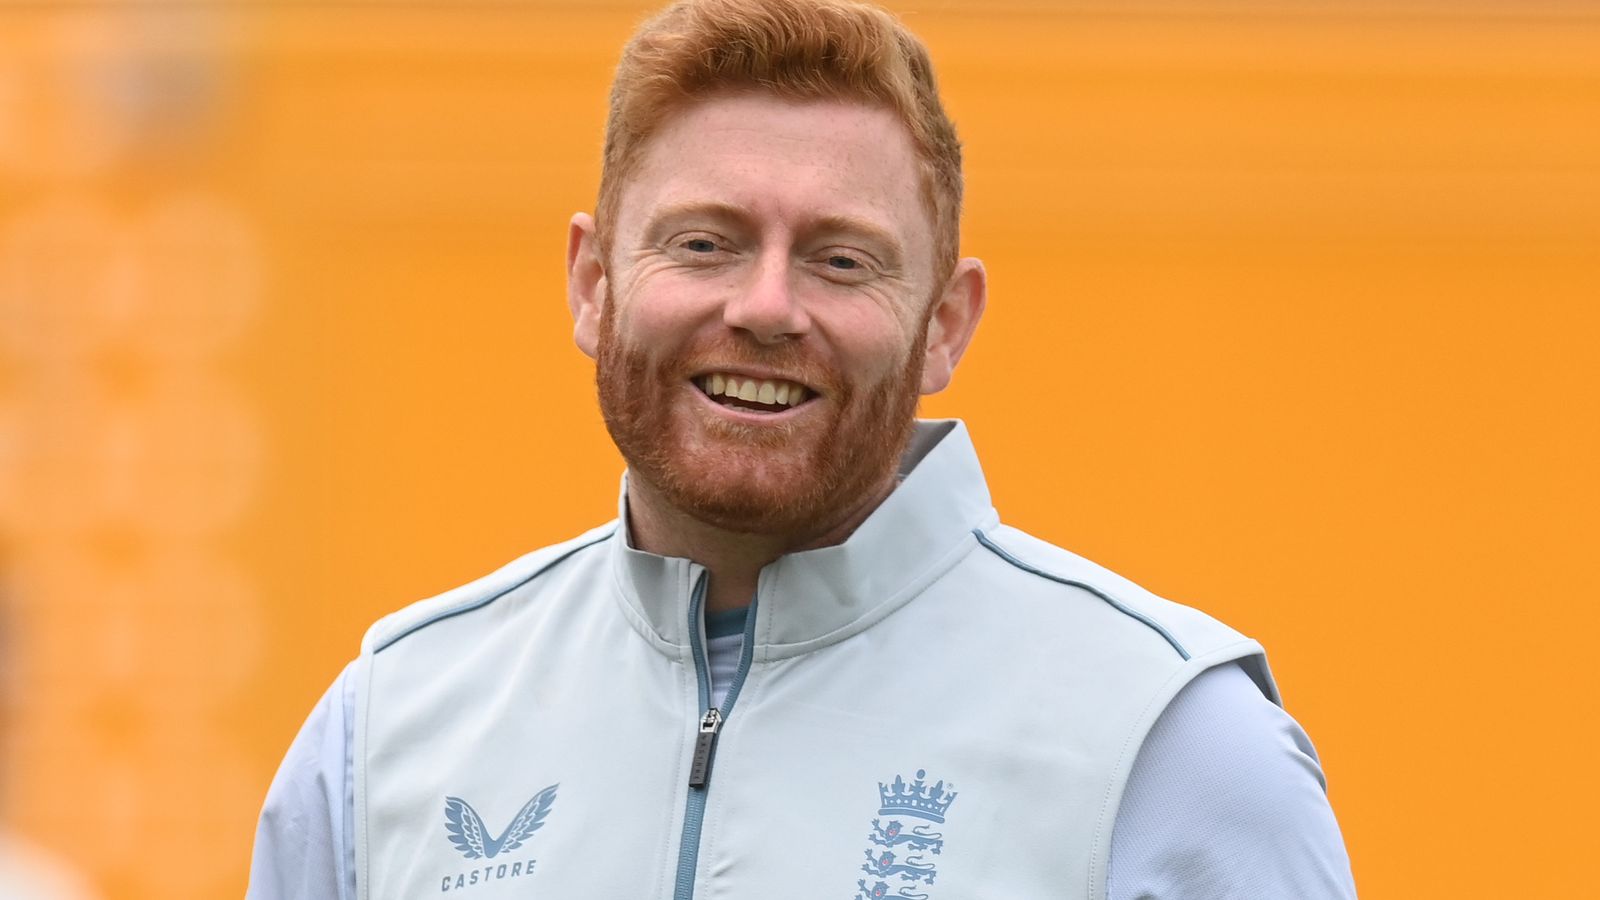 Jonny Bairstow: England batsman set to play first Test against New Zealand as ‘exciting’ new era gets underway